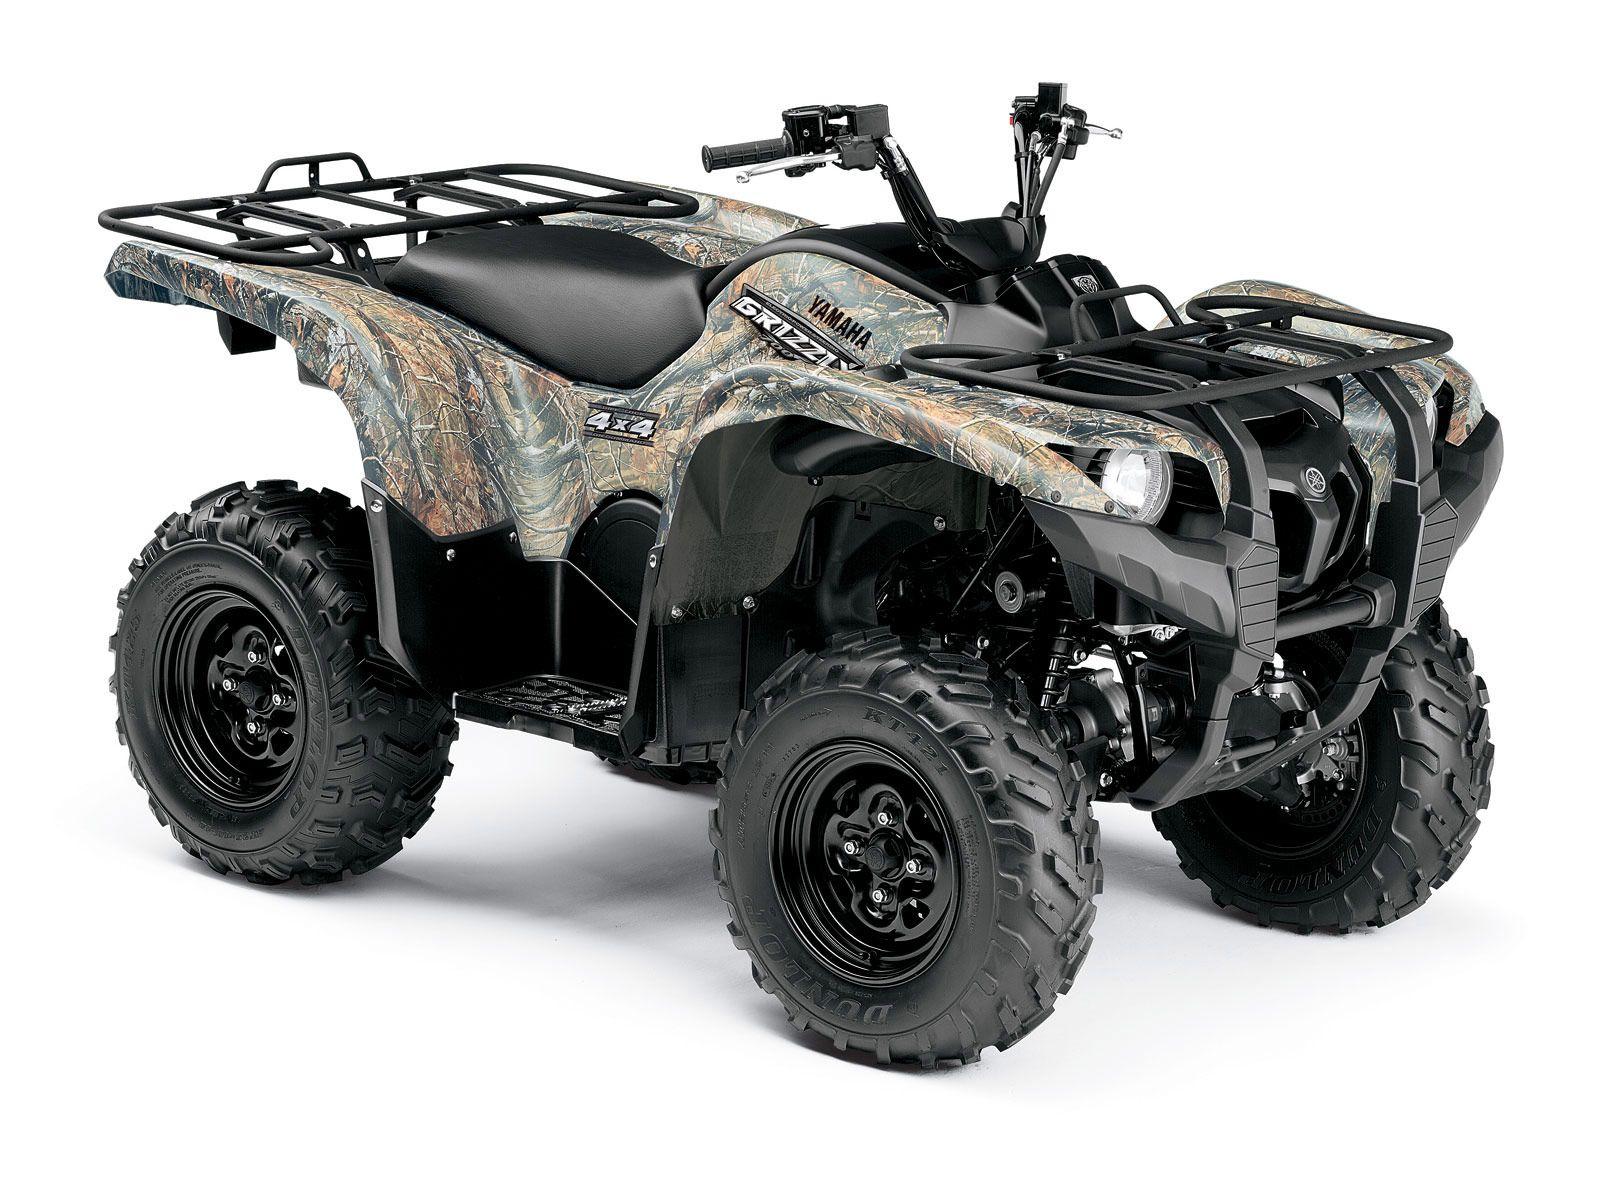 YAMAHA Grizzly 700 FI EPS Ducks Unlimited